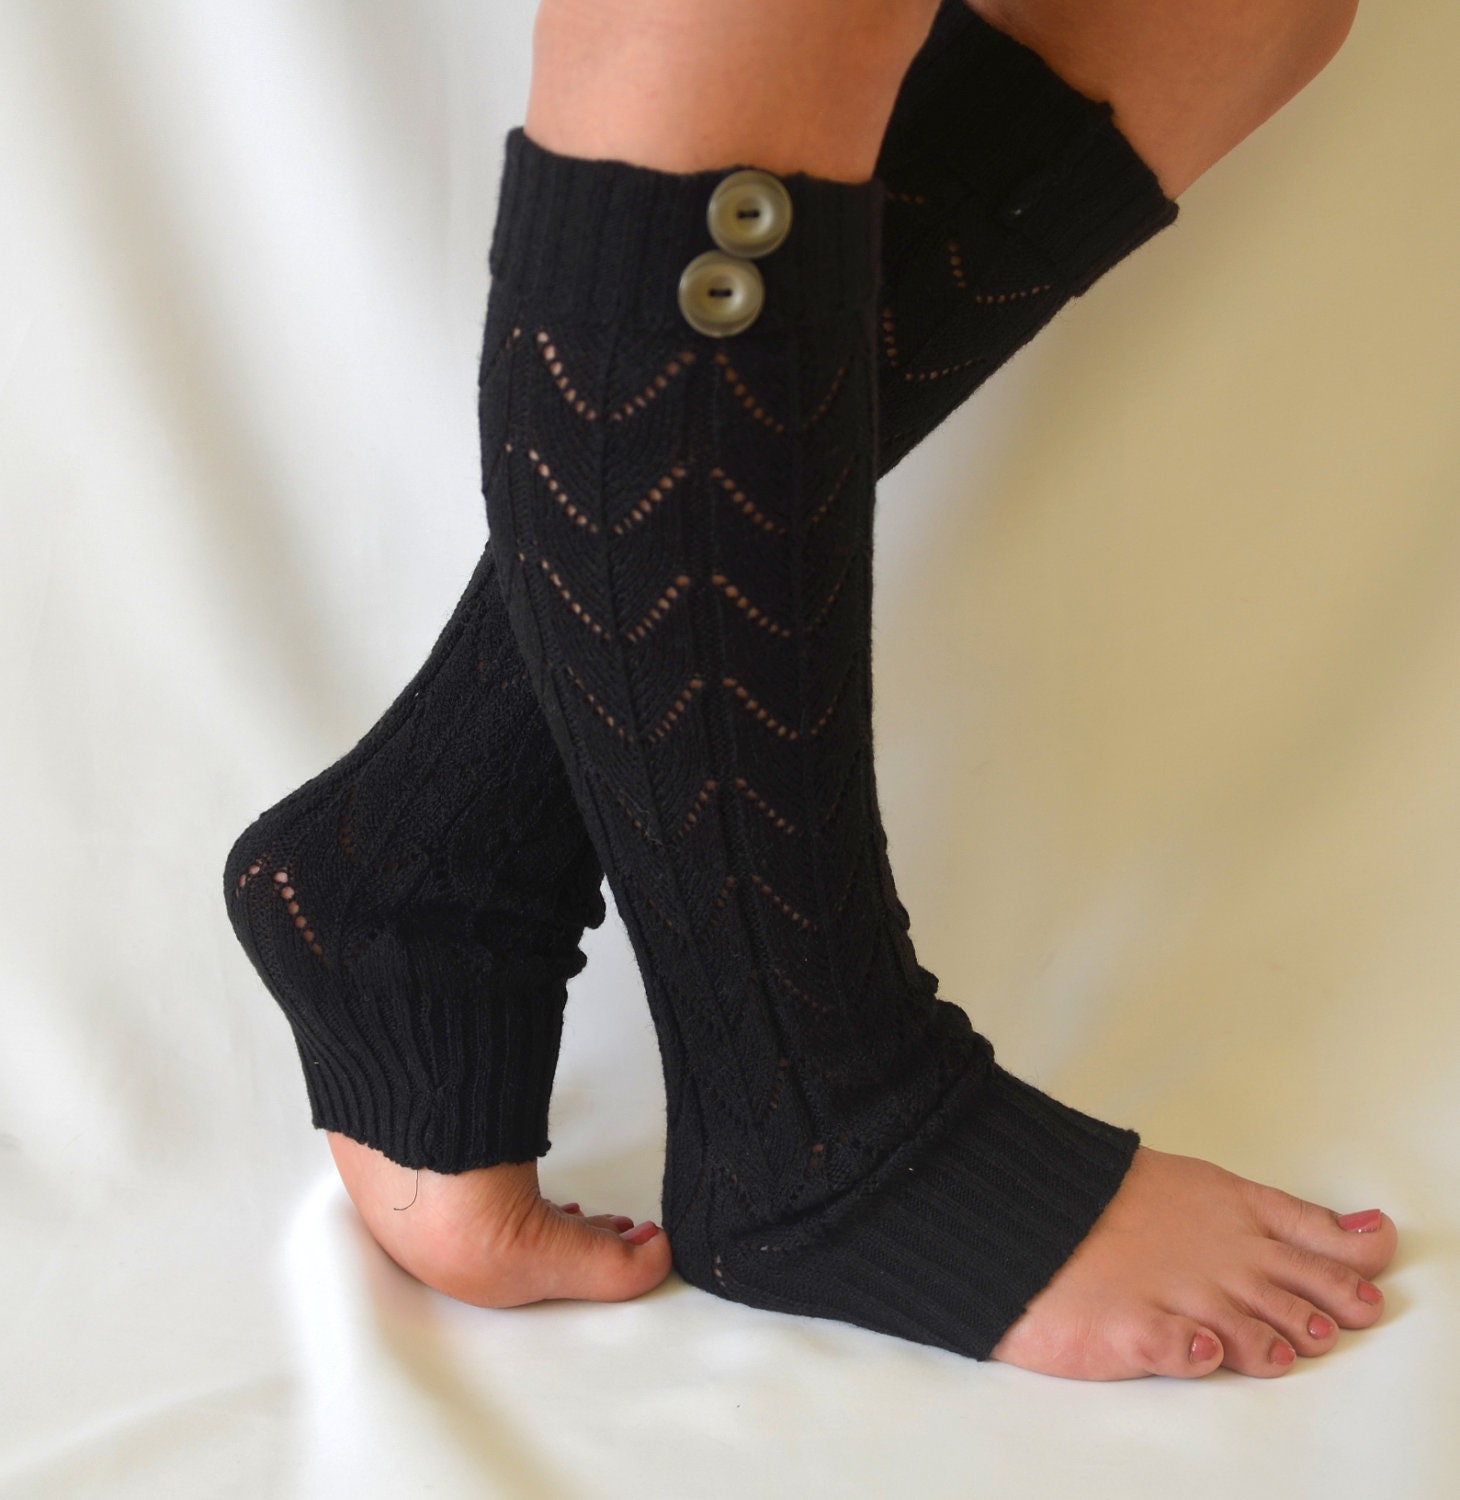 Bs5384 Black Leg Warmers With Buttons Lace Leg Warmers By Bstyle